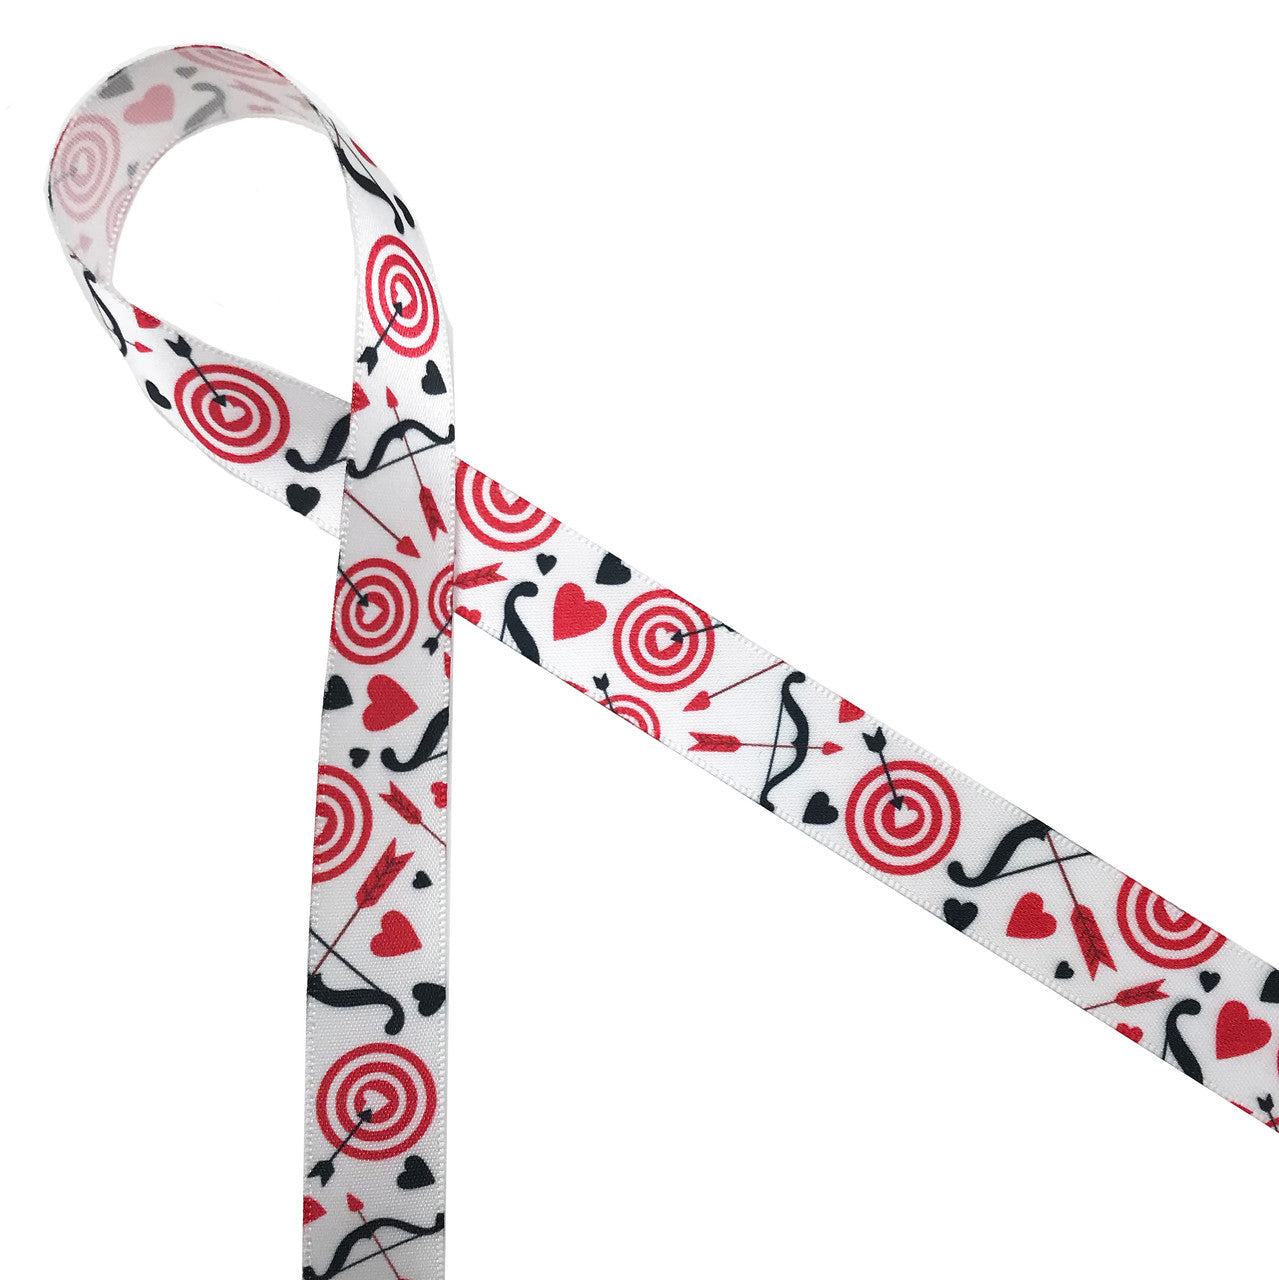 Valentine targets ribbon with hearts and arrows printed on 5/8" white single face satin